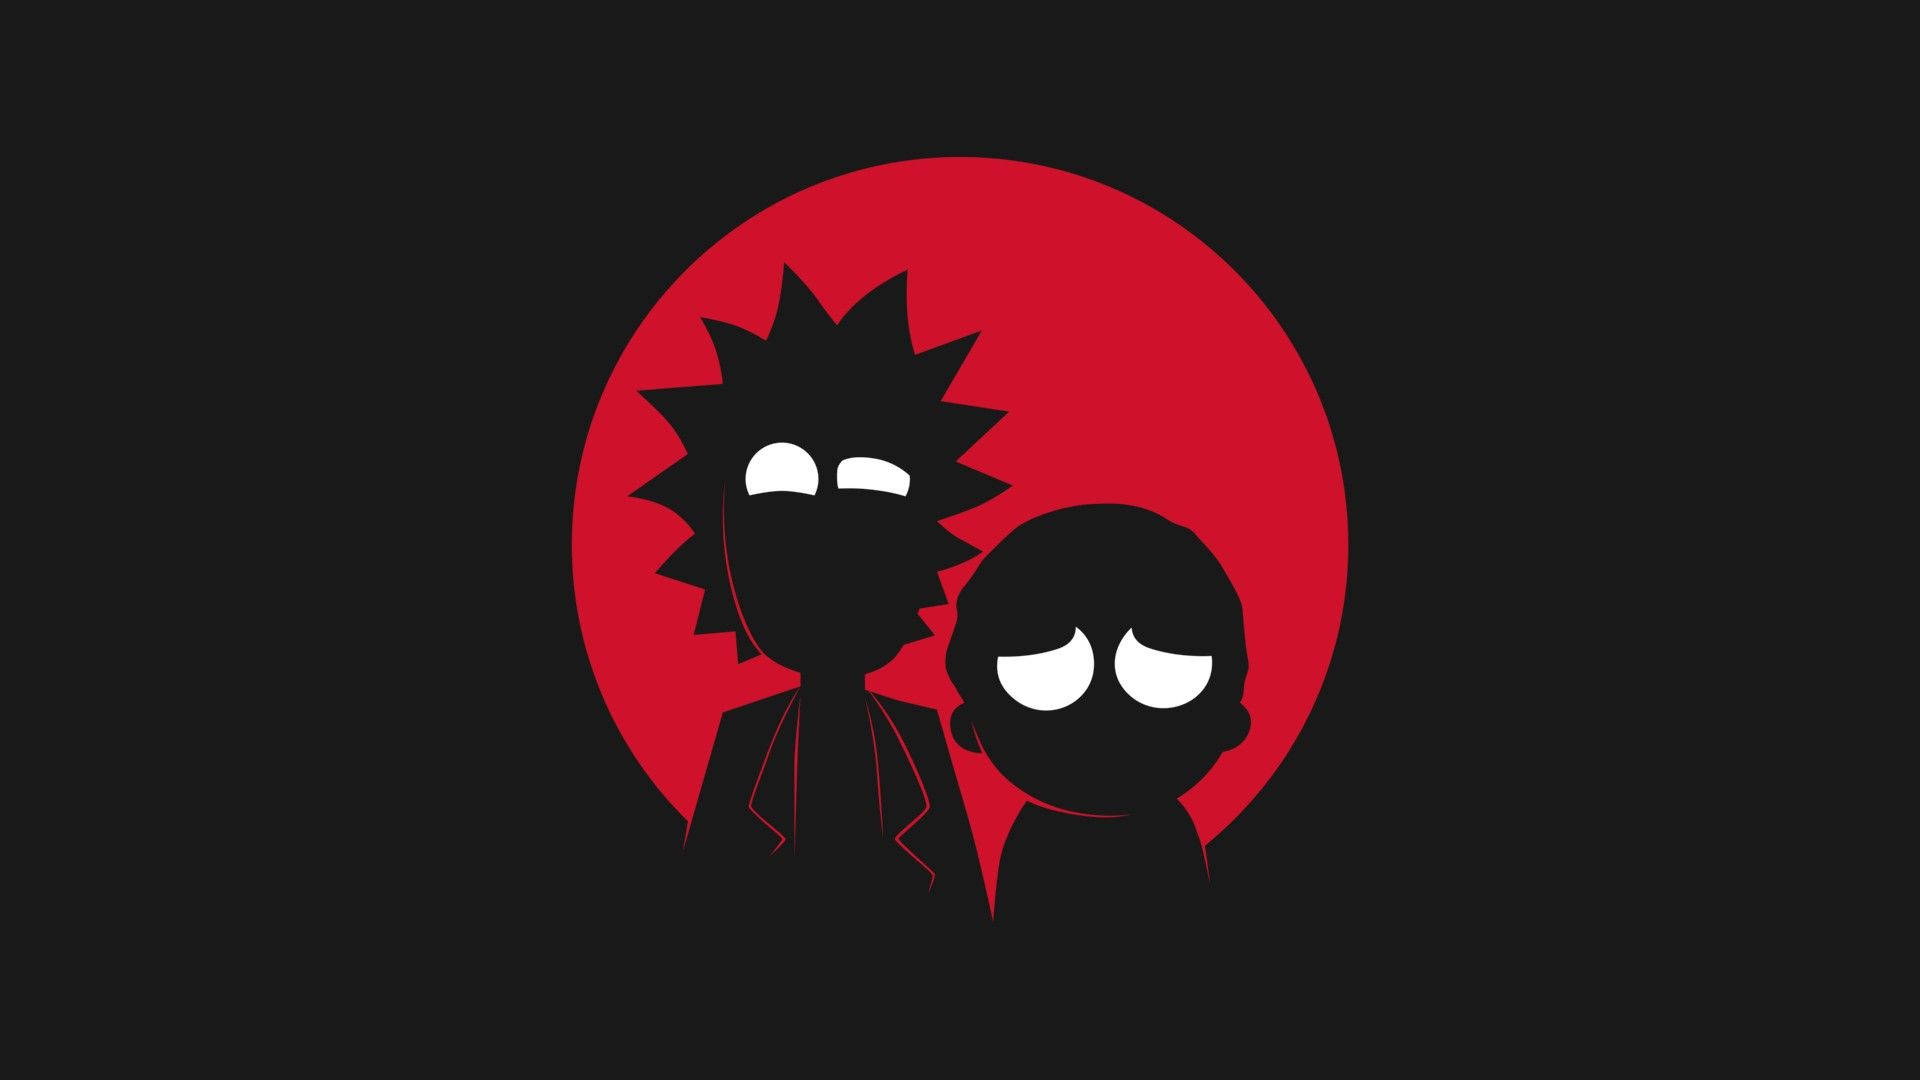 Red Rick And Morty Silhouette Minimalism Background